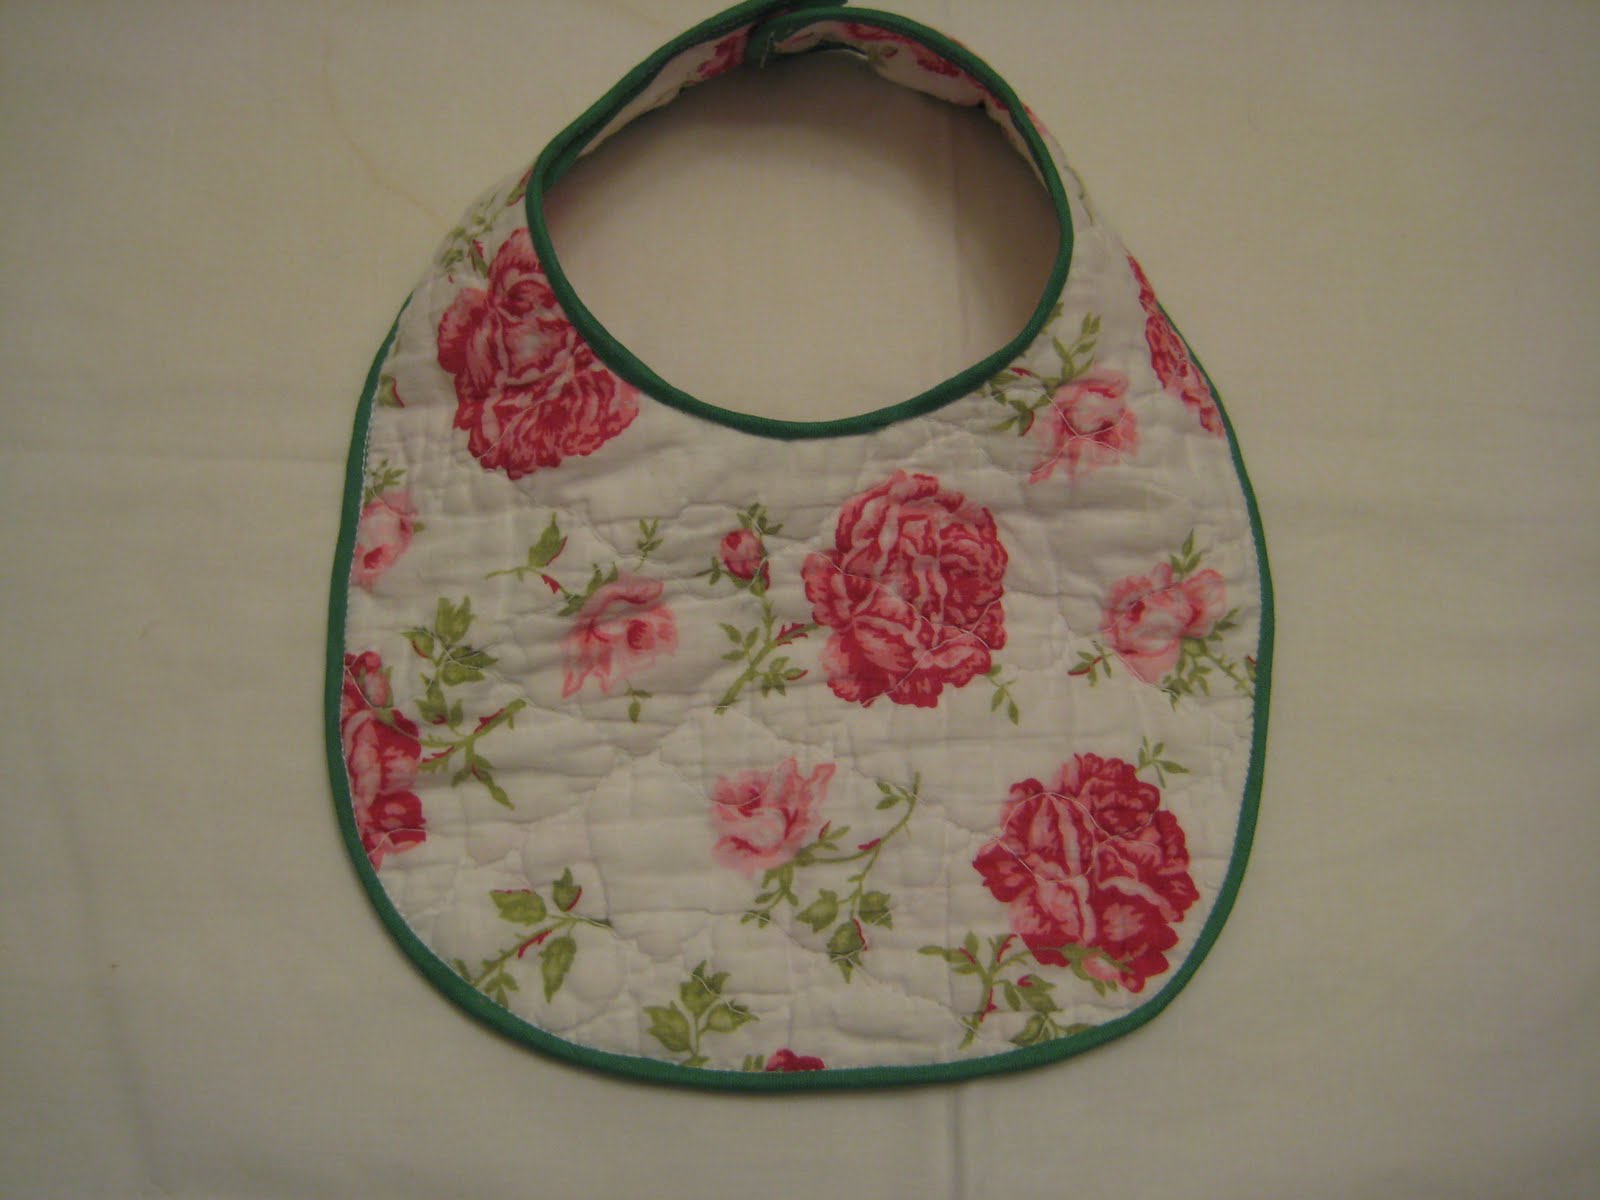 Baby Bib Sewing Patterns - LoveToKnow: Answers for Women on Family